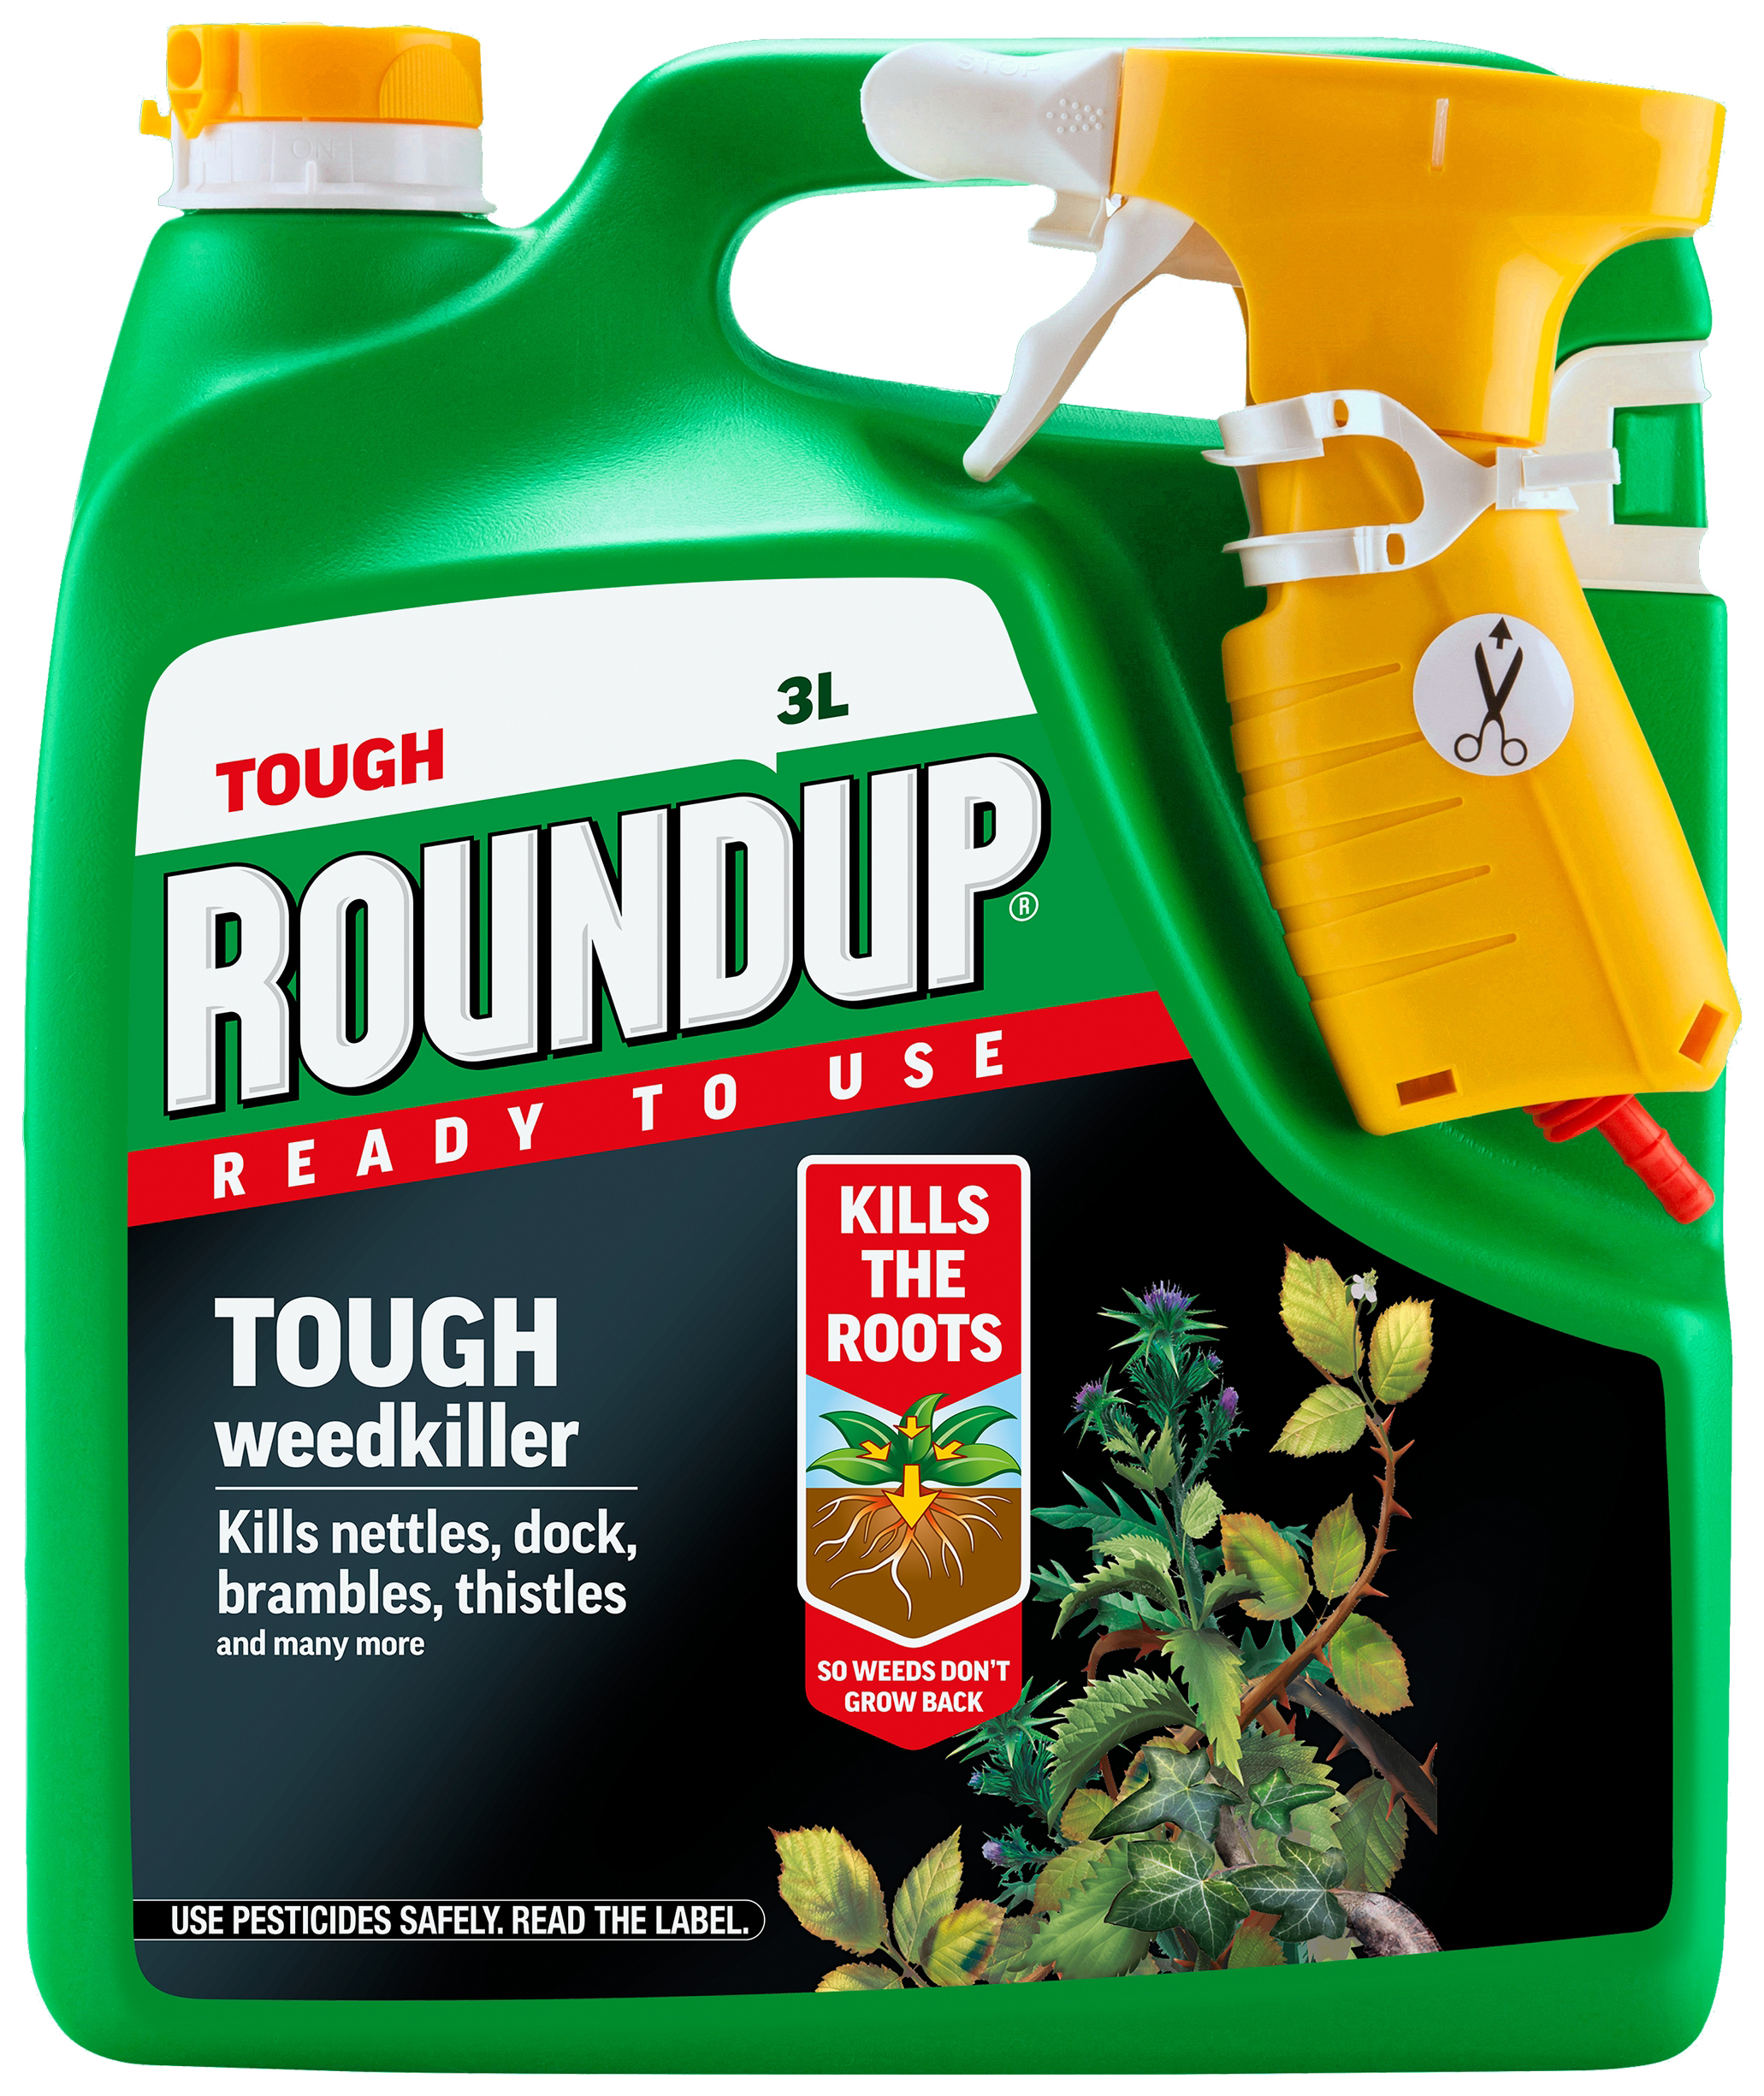 Roundup Ready to Use Tough Weed Killer - 3L